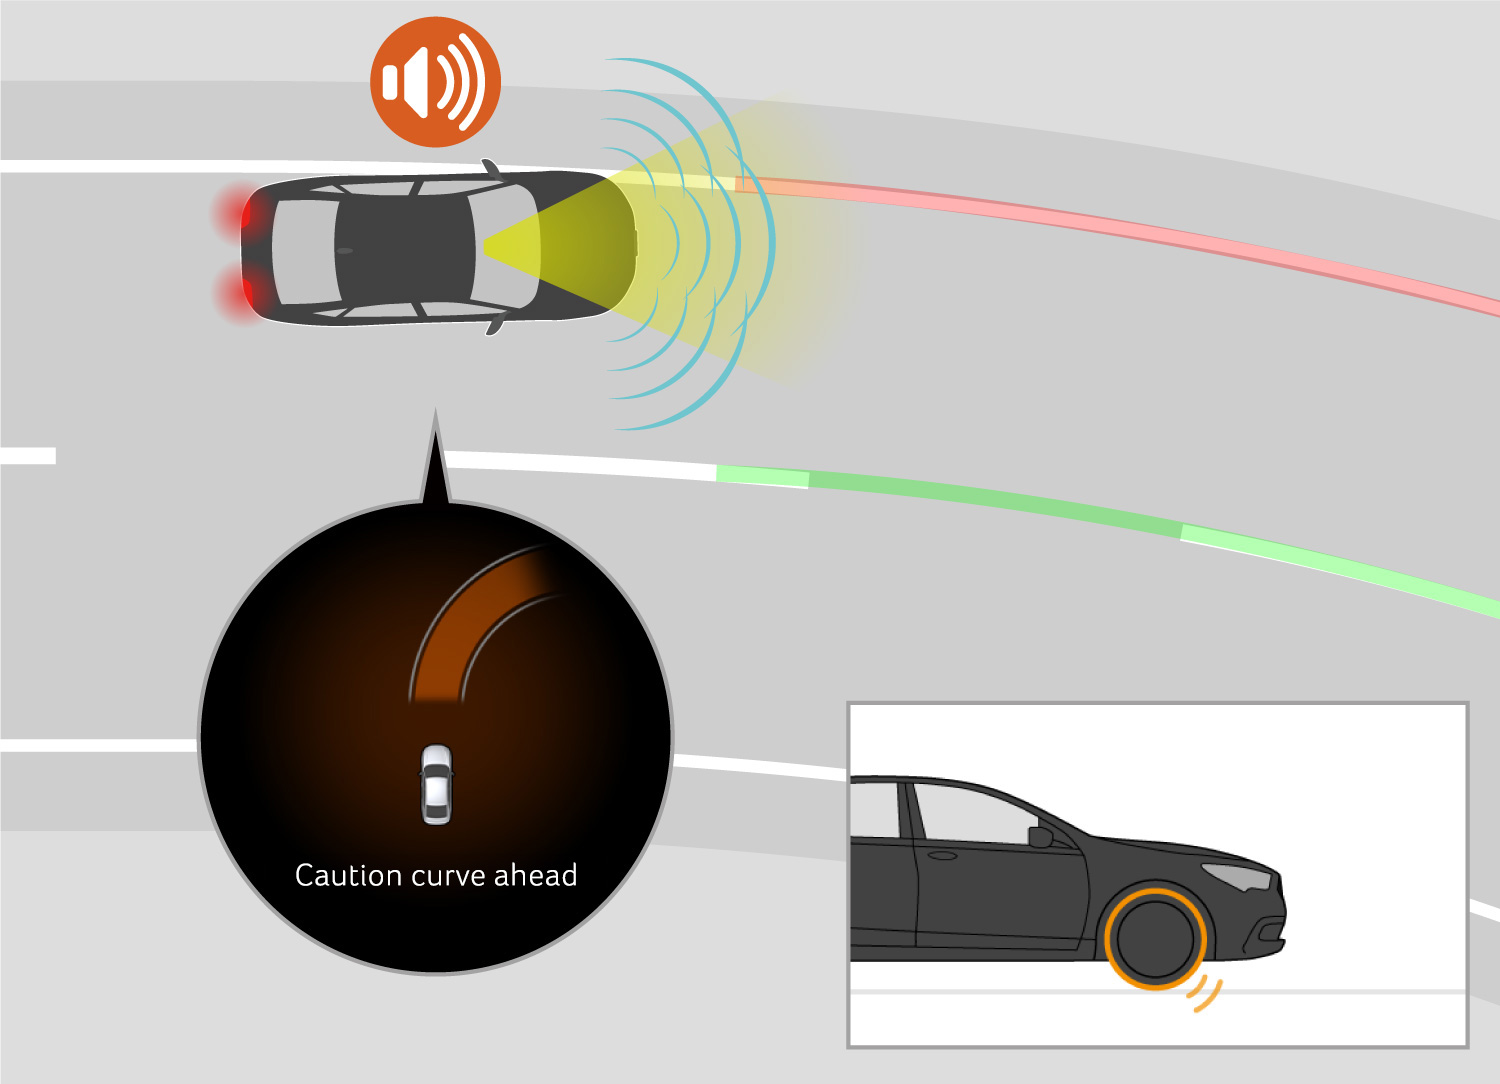 The system switches the display in the meter to amber color, displays warnings on the Head-Up Display(HUD), provides audible warnings and automatically decelerates the vehicle to prompt the driver to recognize the curve and decelerate.